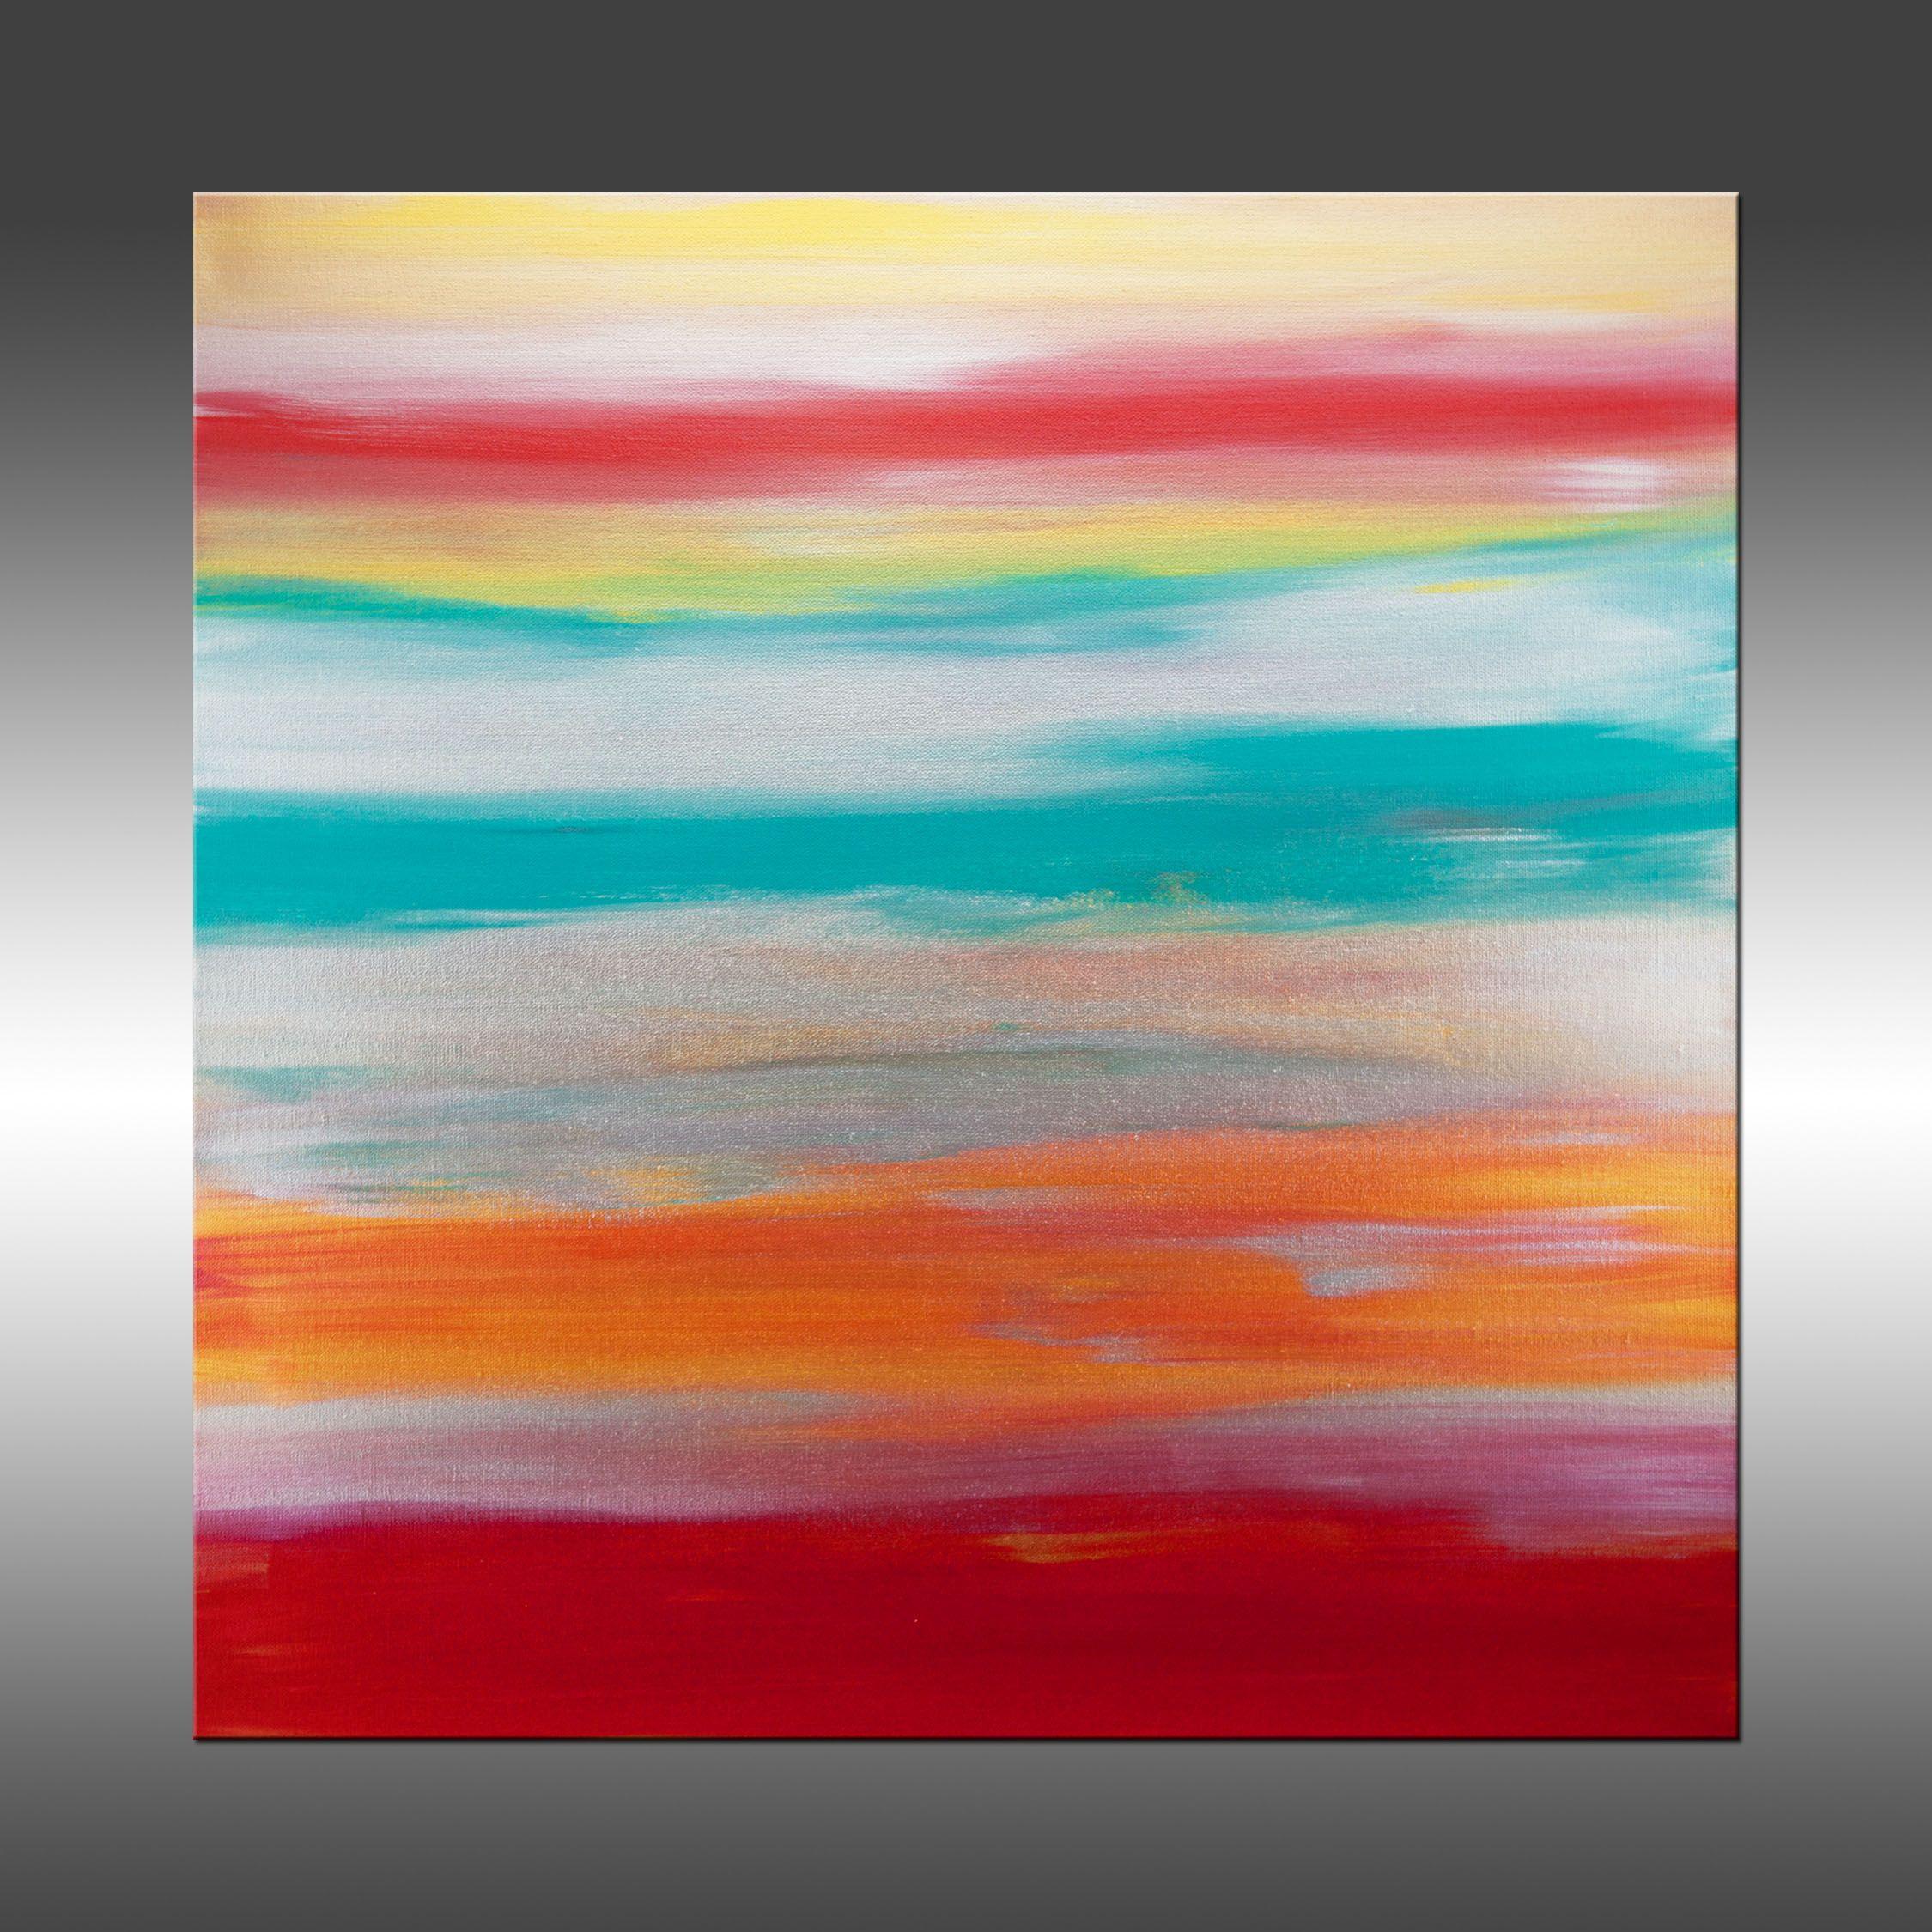 Sunrise 53 is an original painting, created with acrylic paint on gallery-wrapped canvas. It has a width of 24 inches and a height of 24 inches with a depth of 1.5 inches (24x24x1.5).     The colors used in the painting are red, turquoise, and